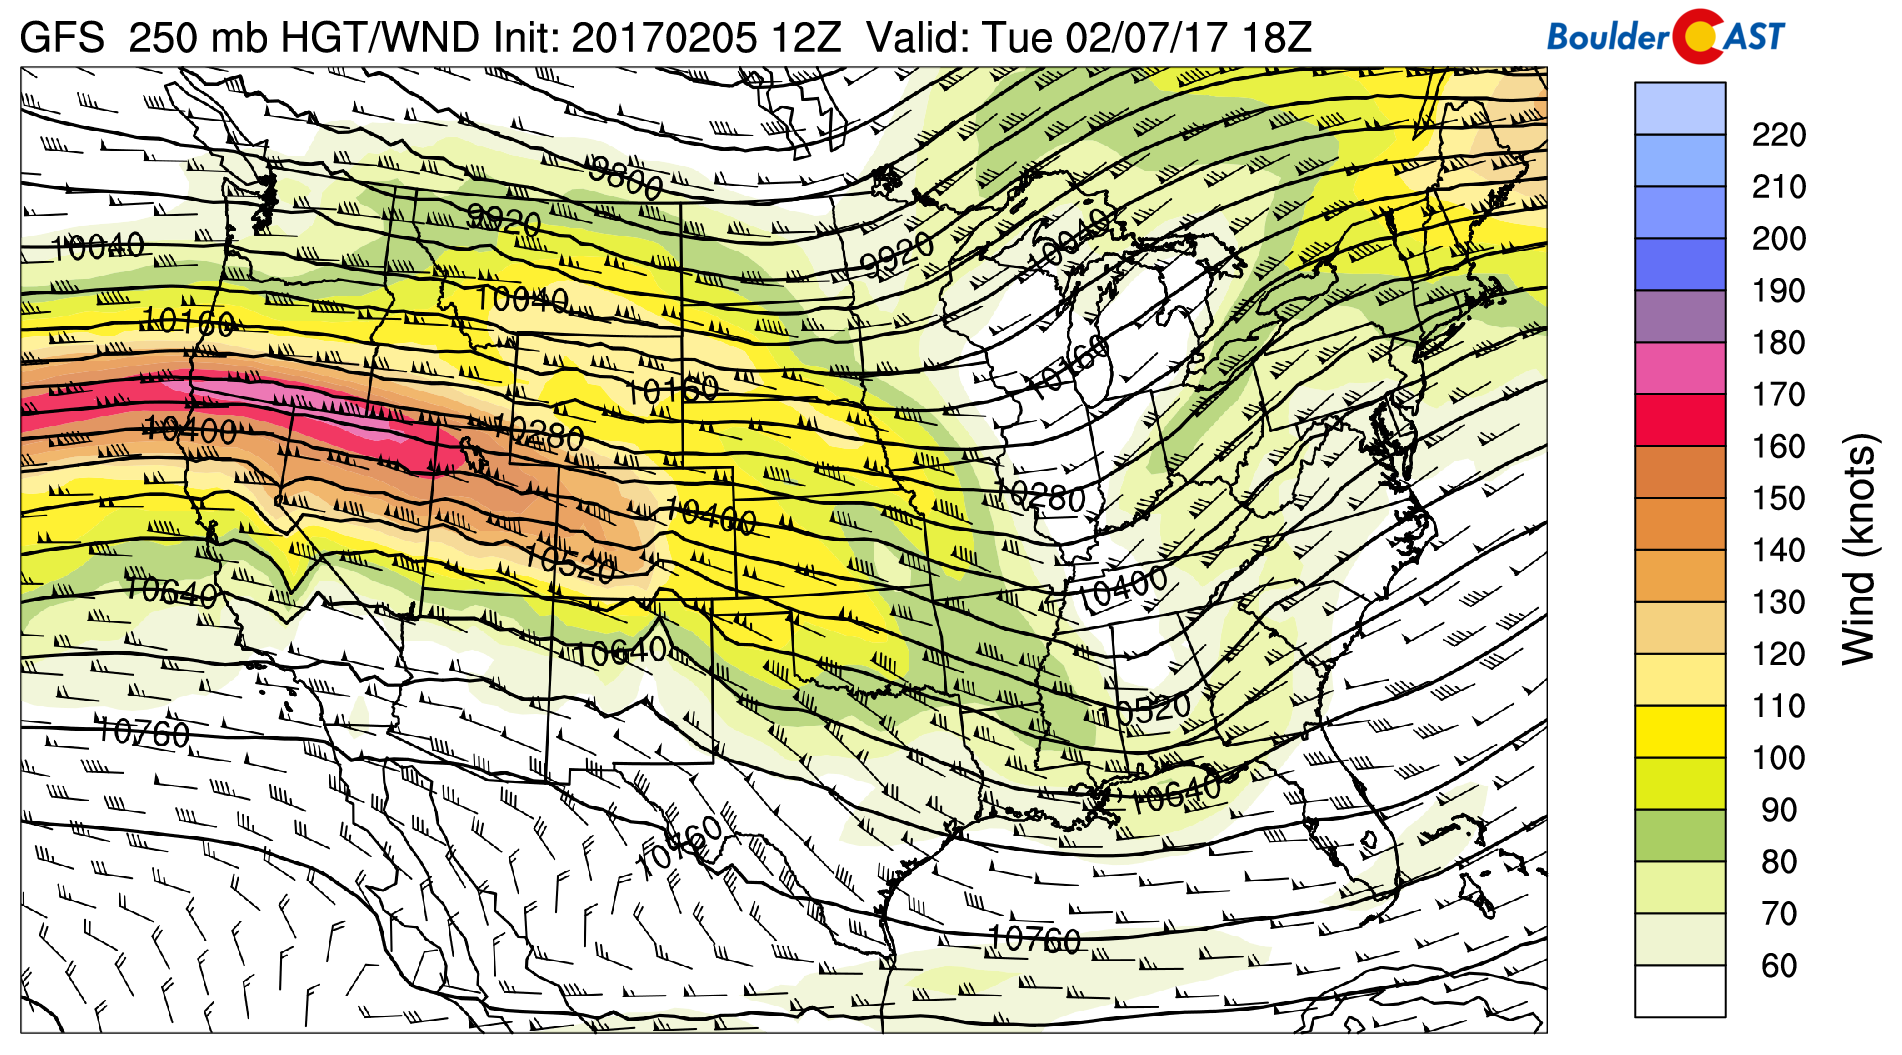 GFS 250 mb upper-level atmospheric flow for Tuesday